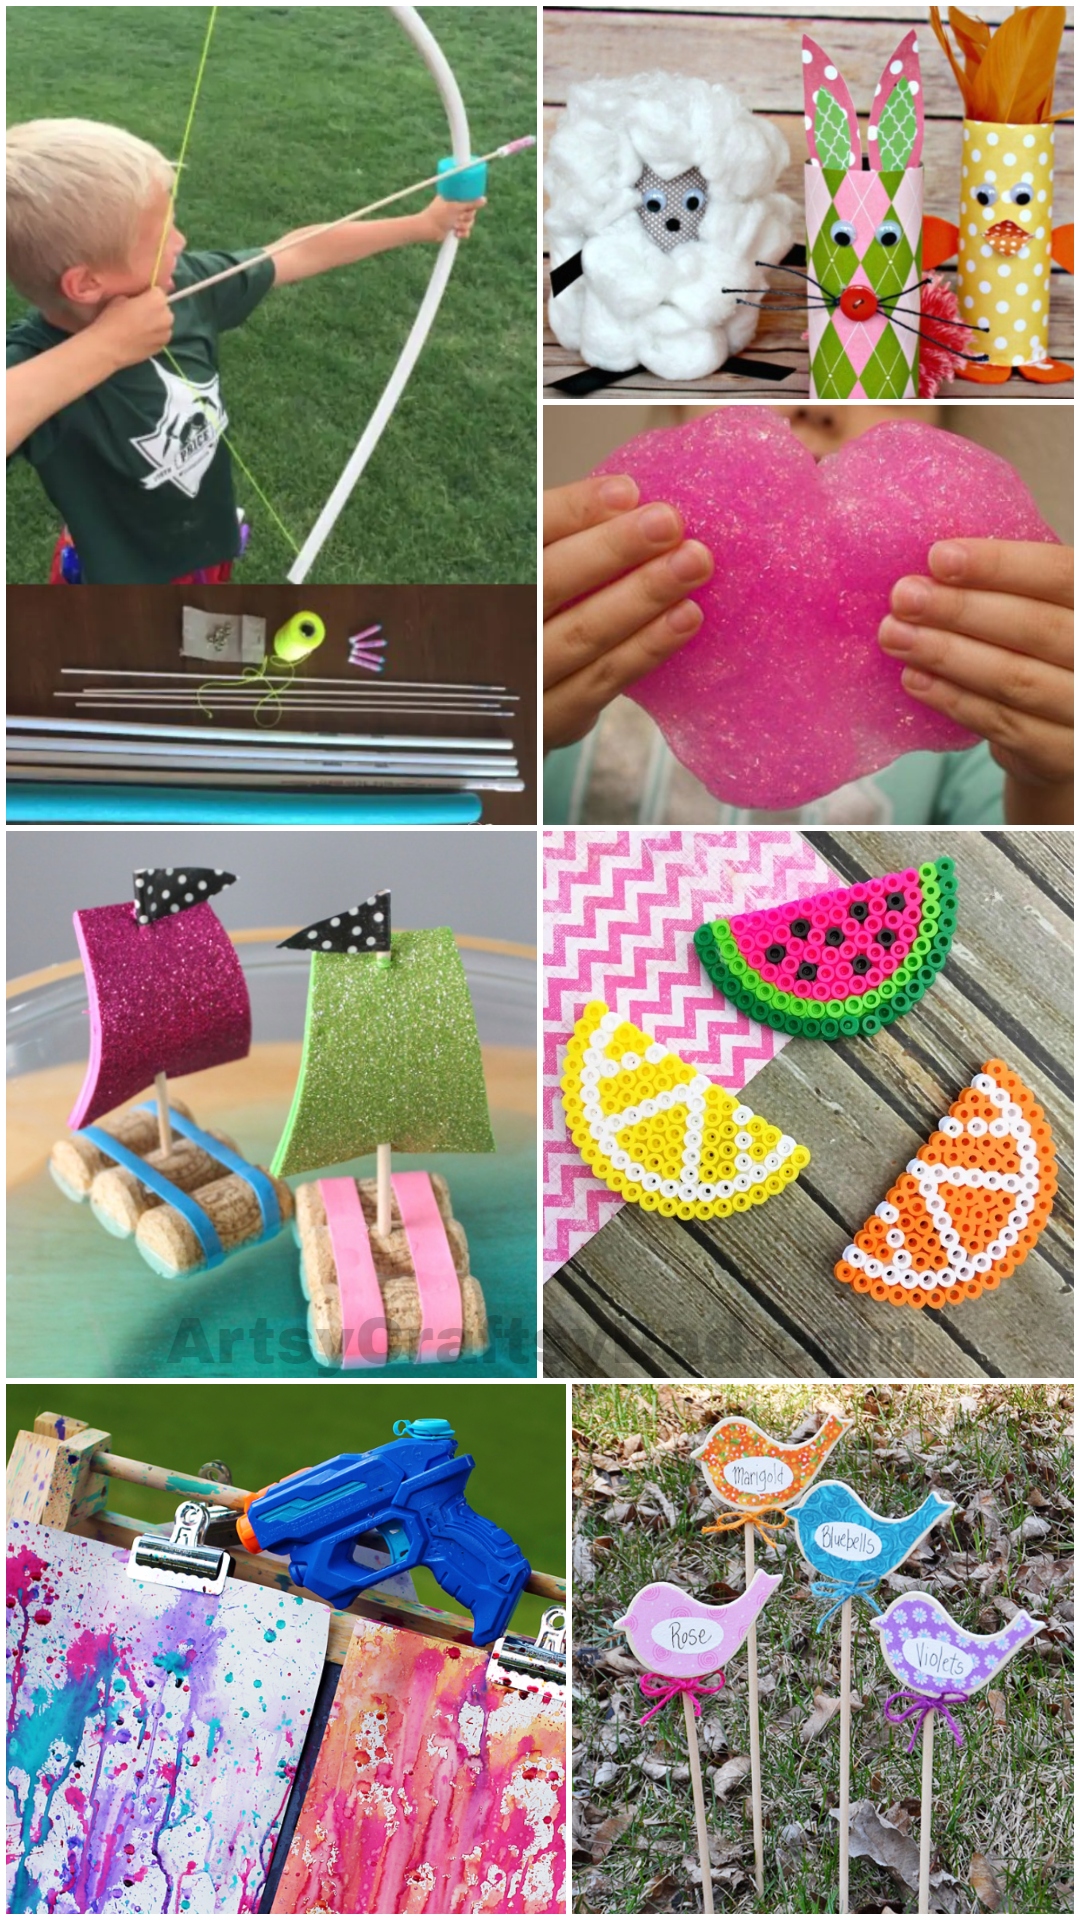 15 Fun DIY Ideas & Activities to Do With the Kids